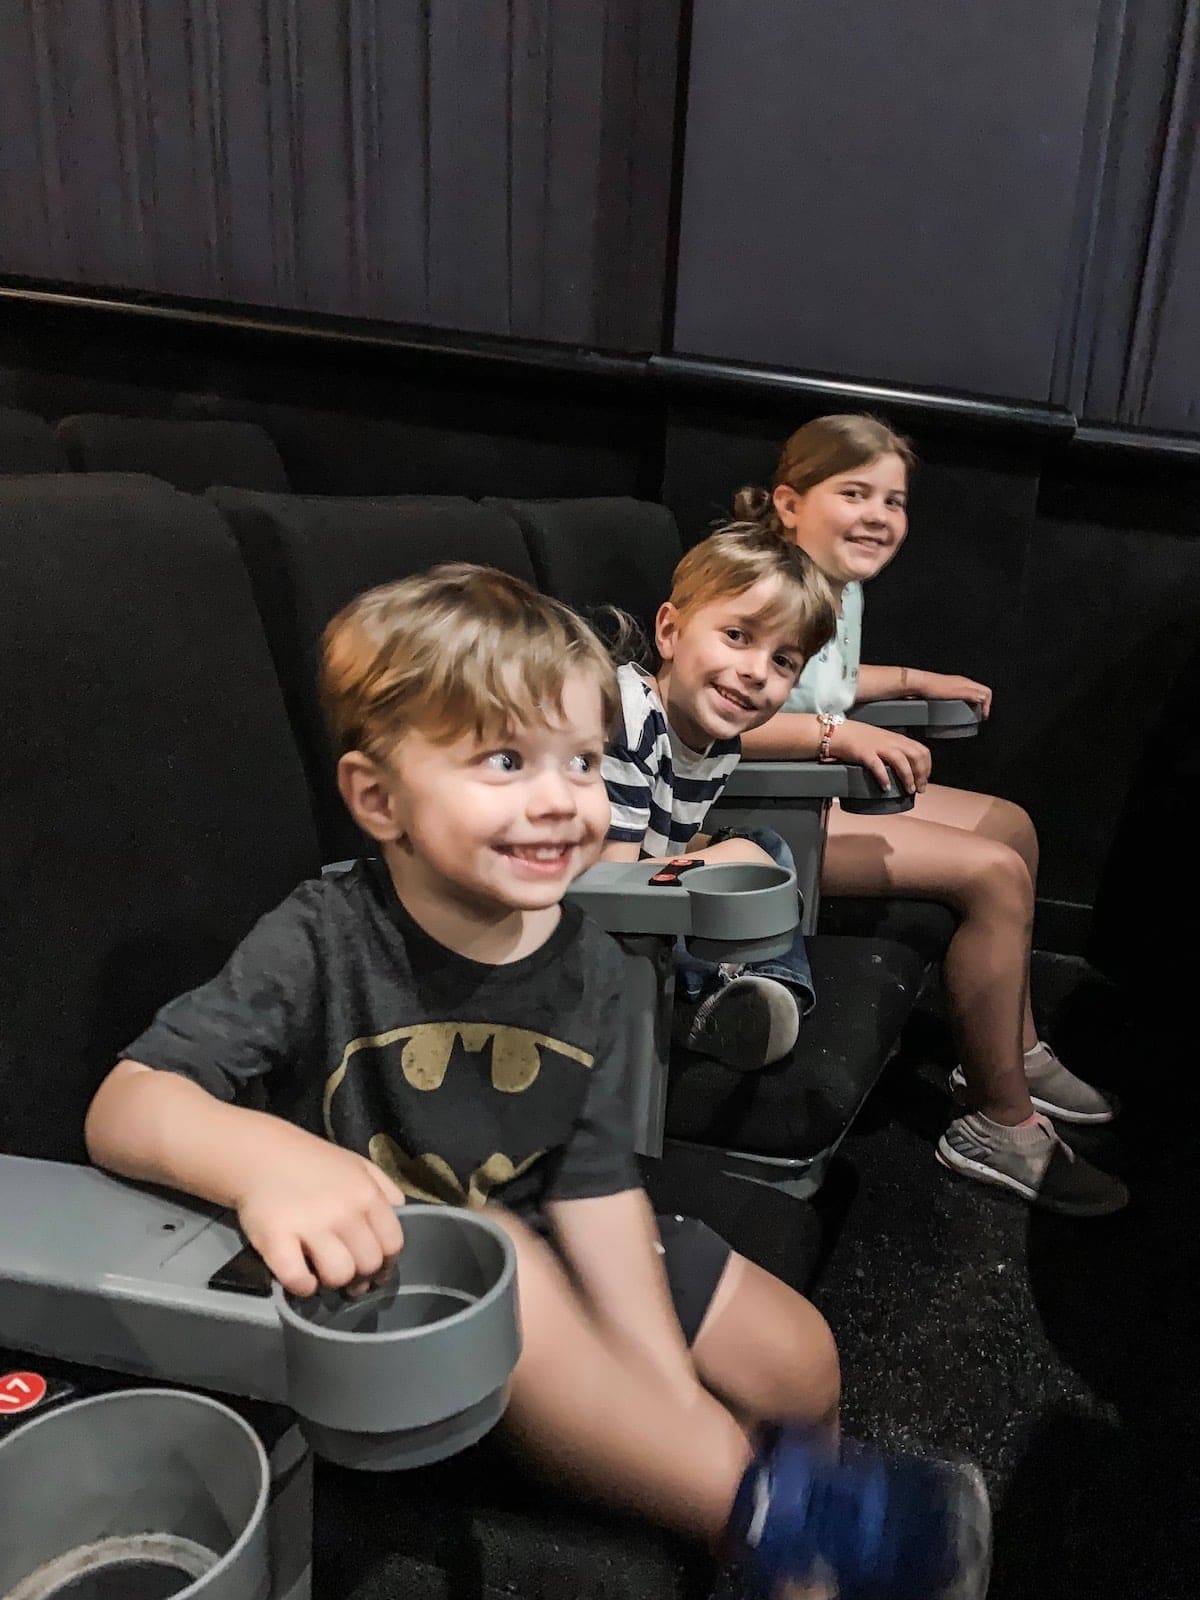 The kids at the movie theater